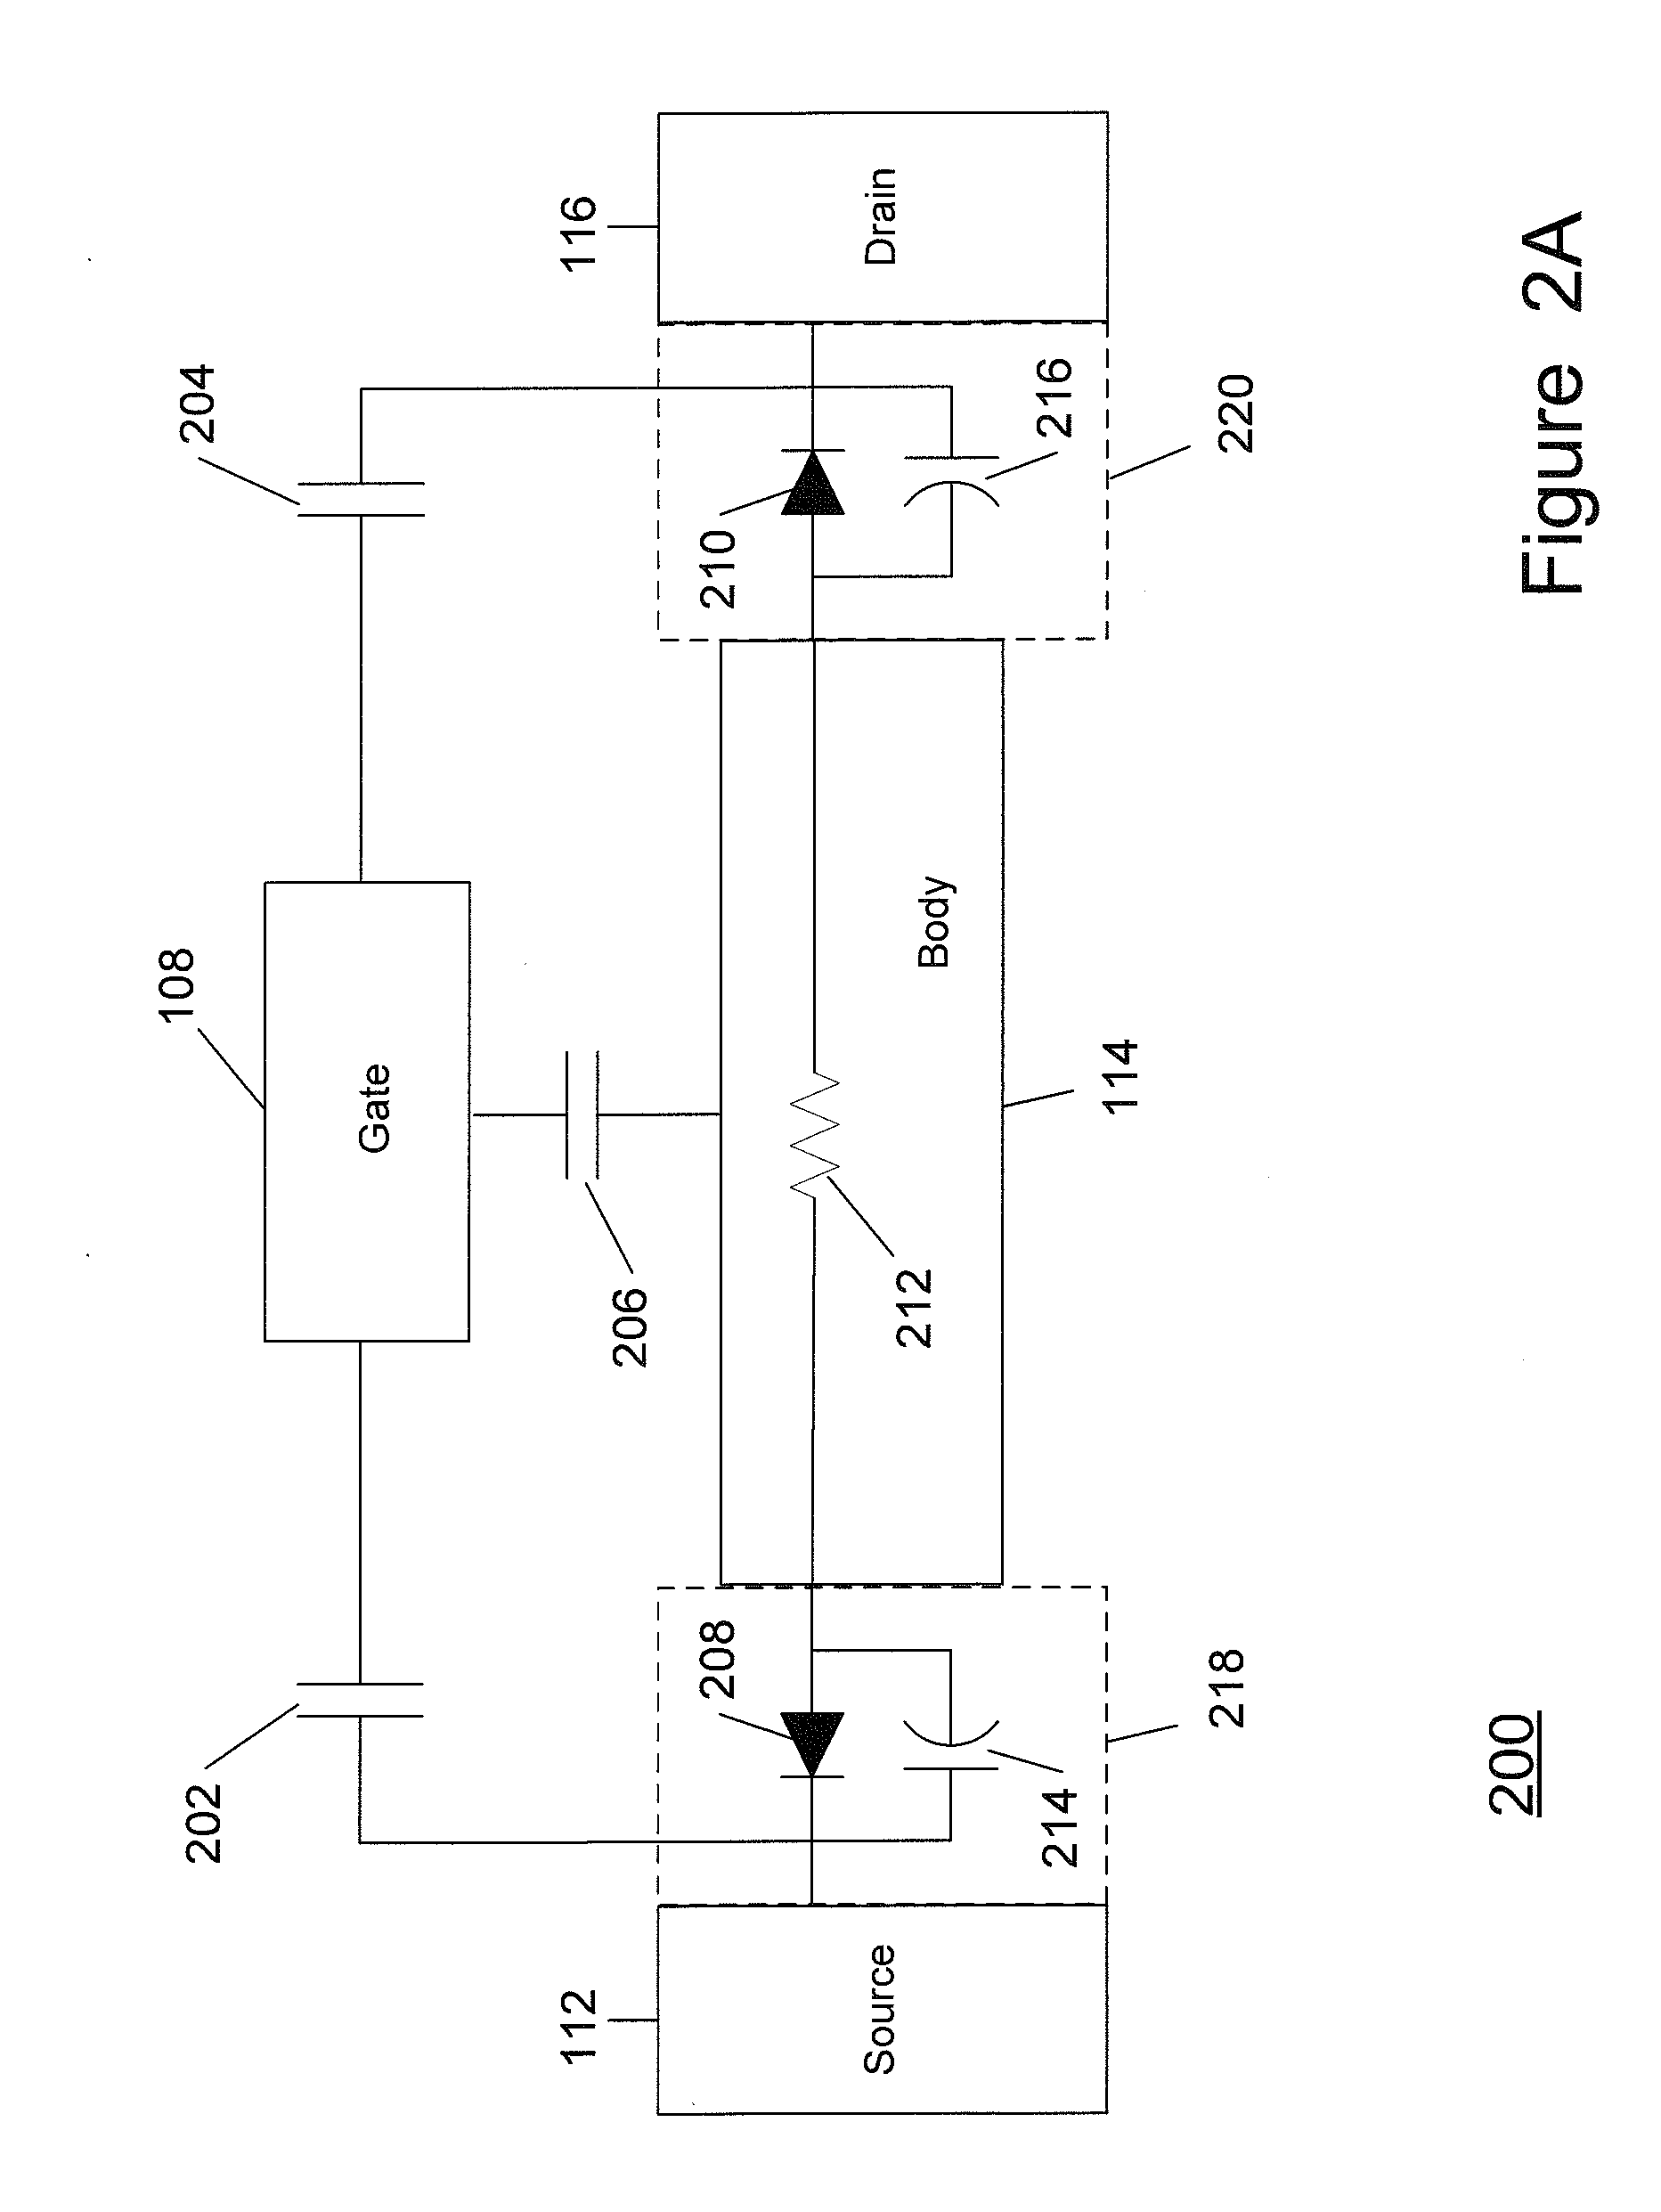 Method and Apparatus for use in Improving Linearity of MOSFETS using an Accumulated Charge Sink-Harmonic Wrinkle Reduction